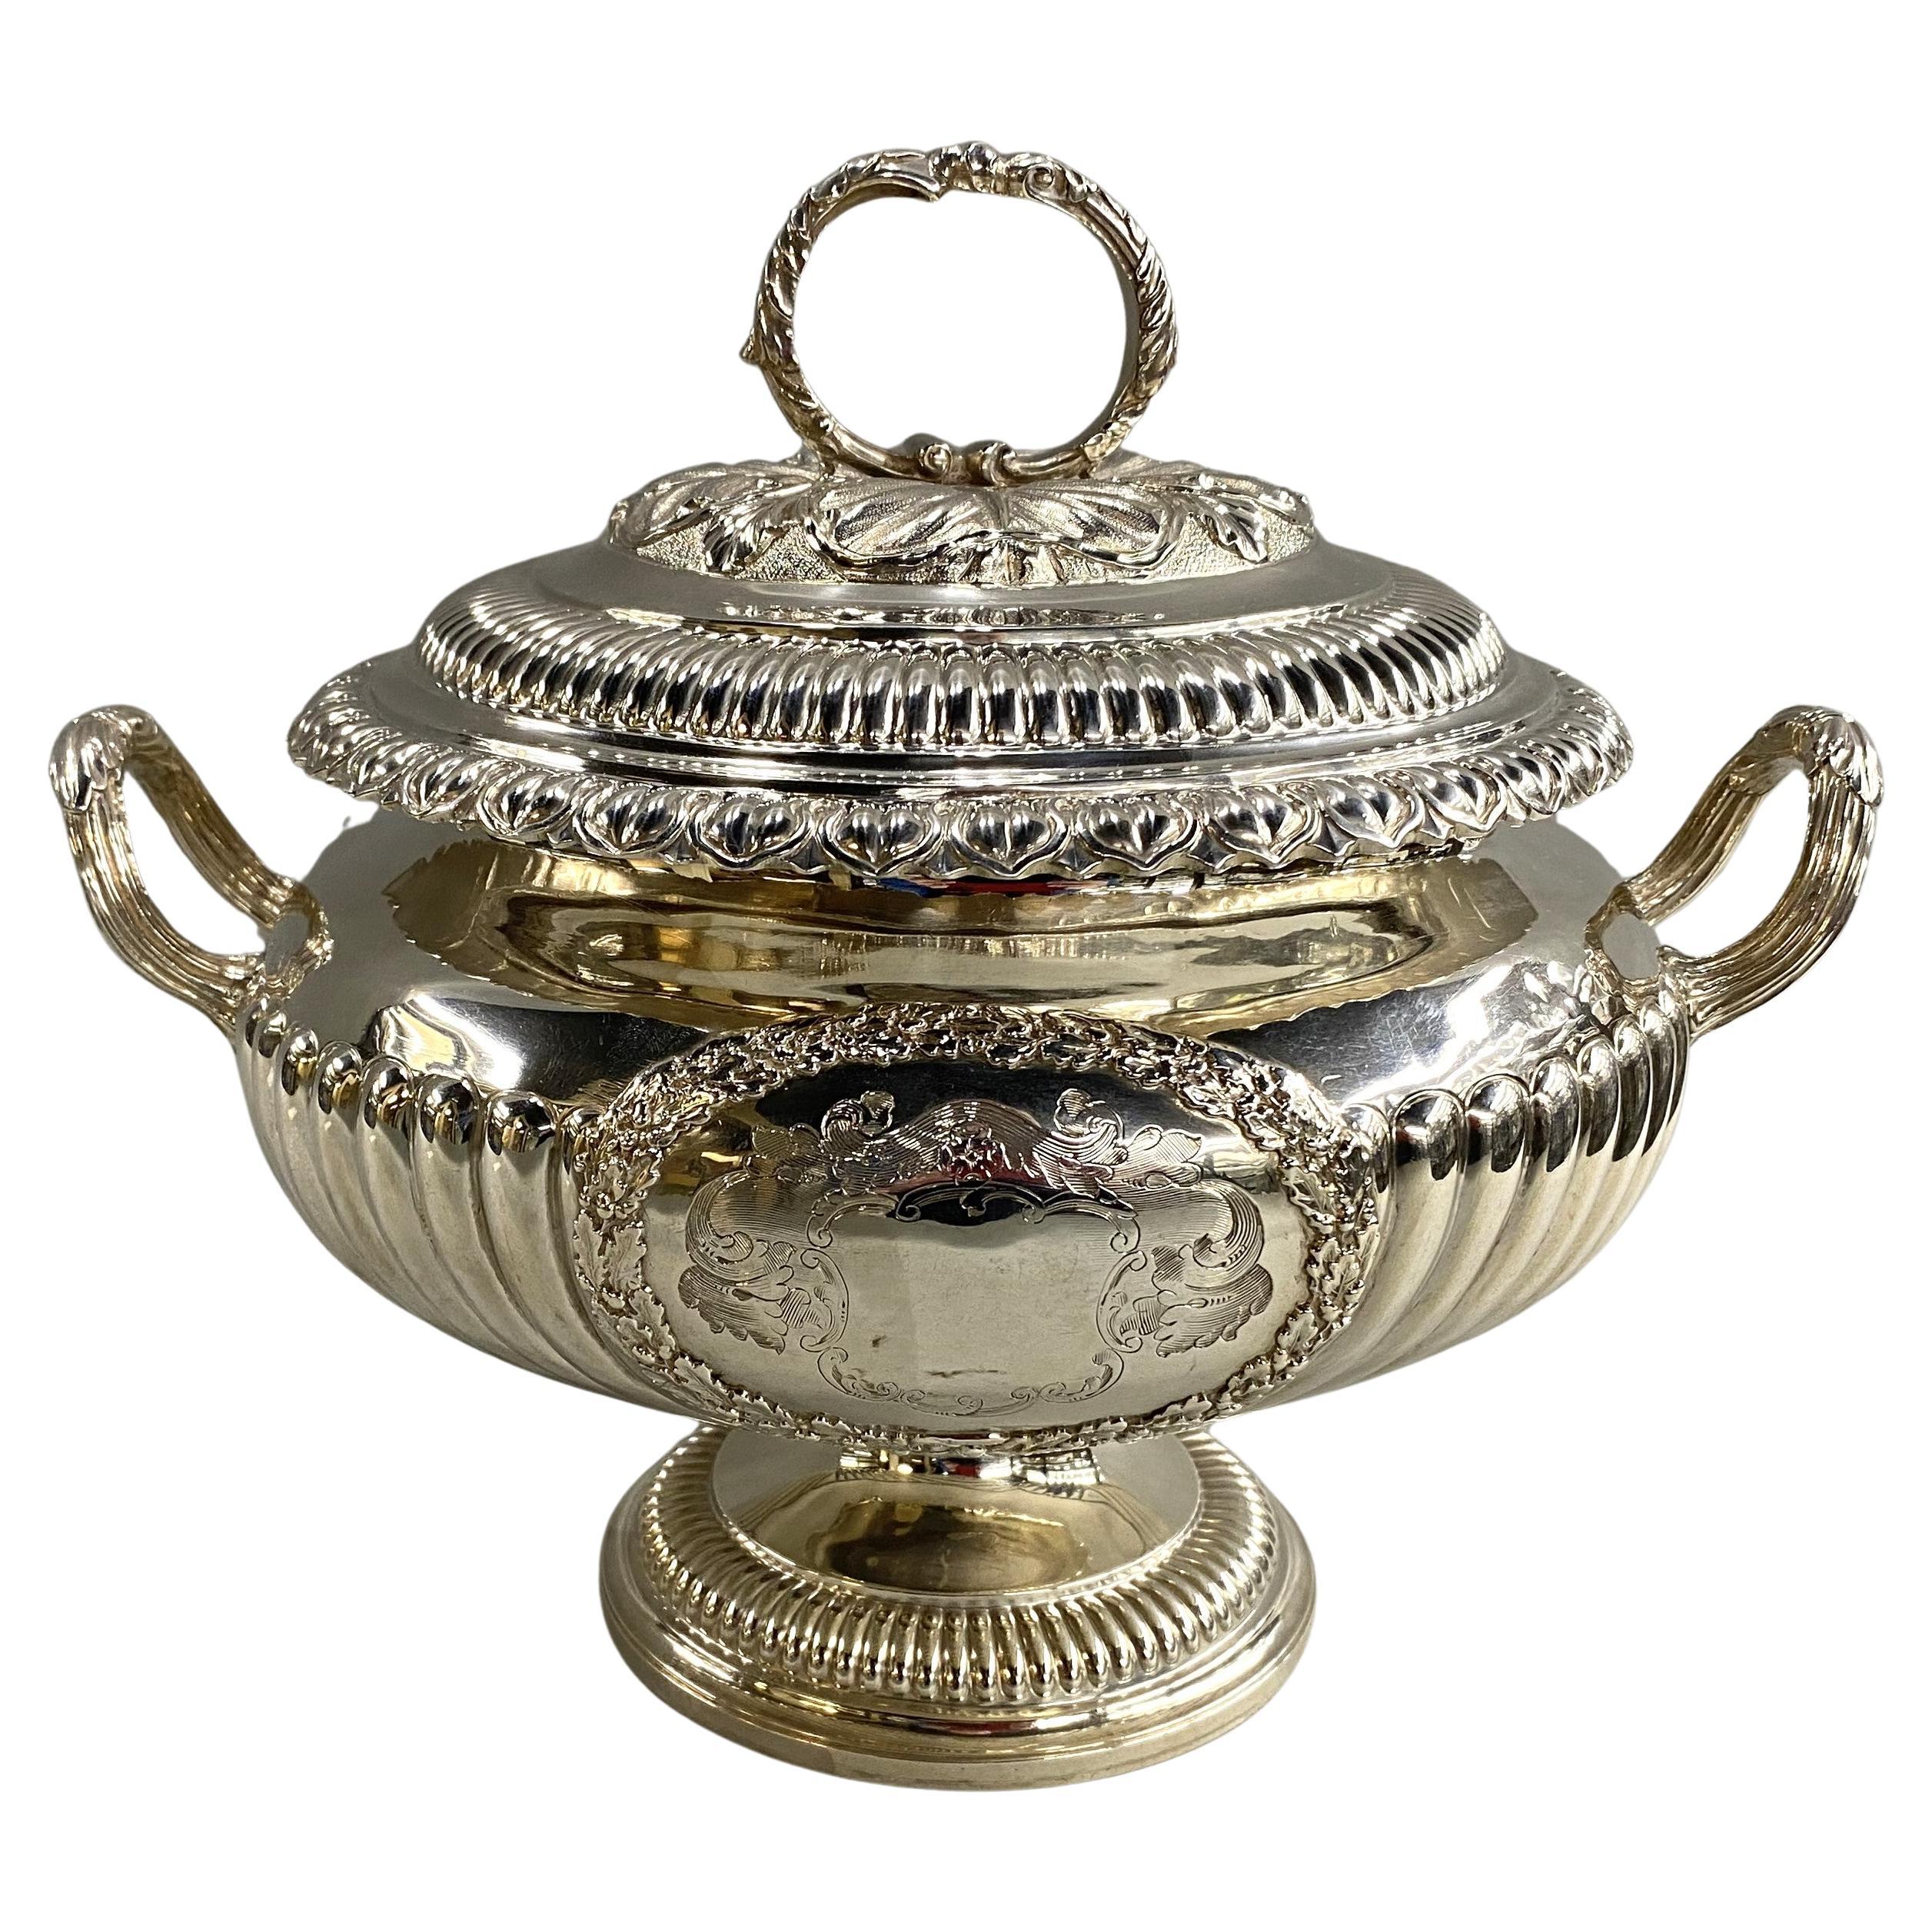 George IV Sterling Silver Covered Soup Tureen, Samuel Hennell, London c 1822